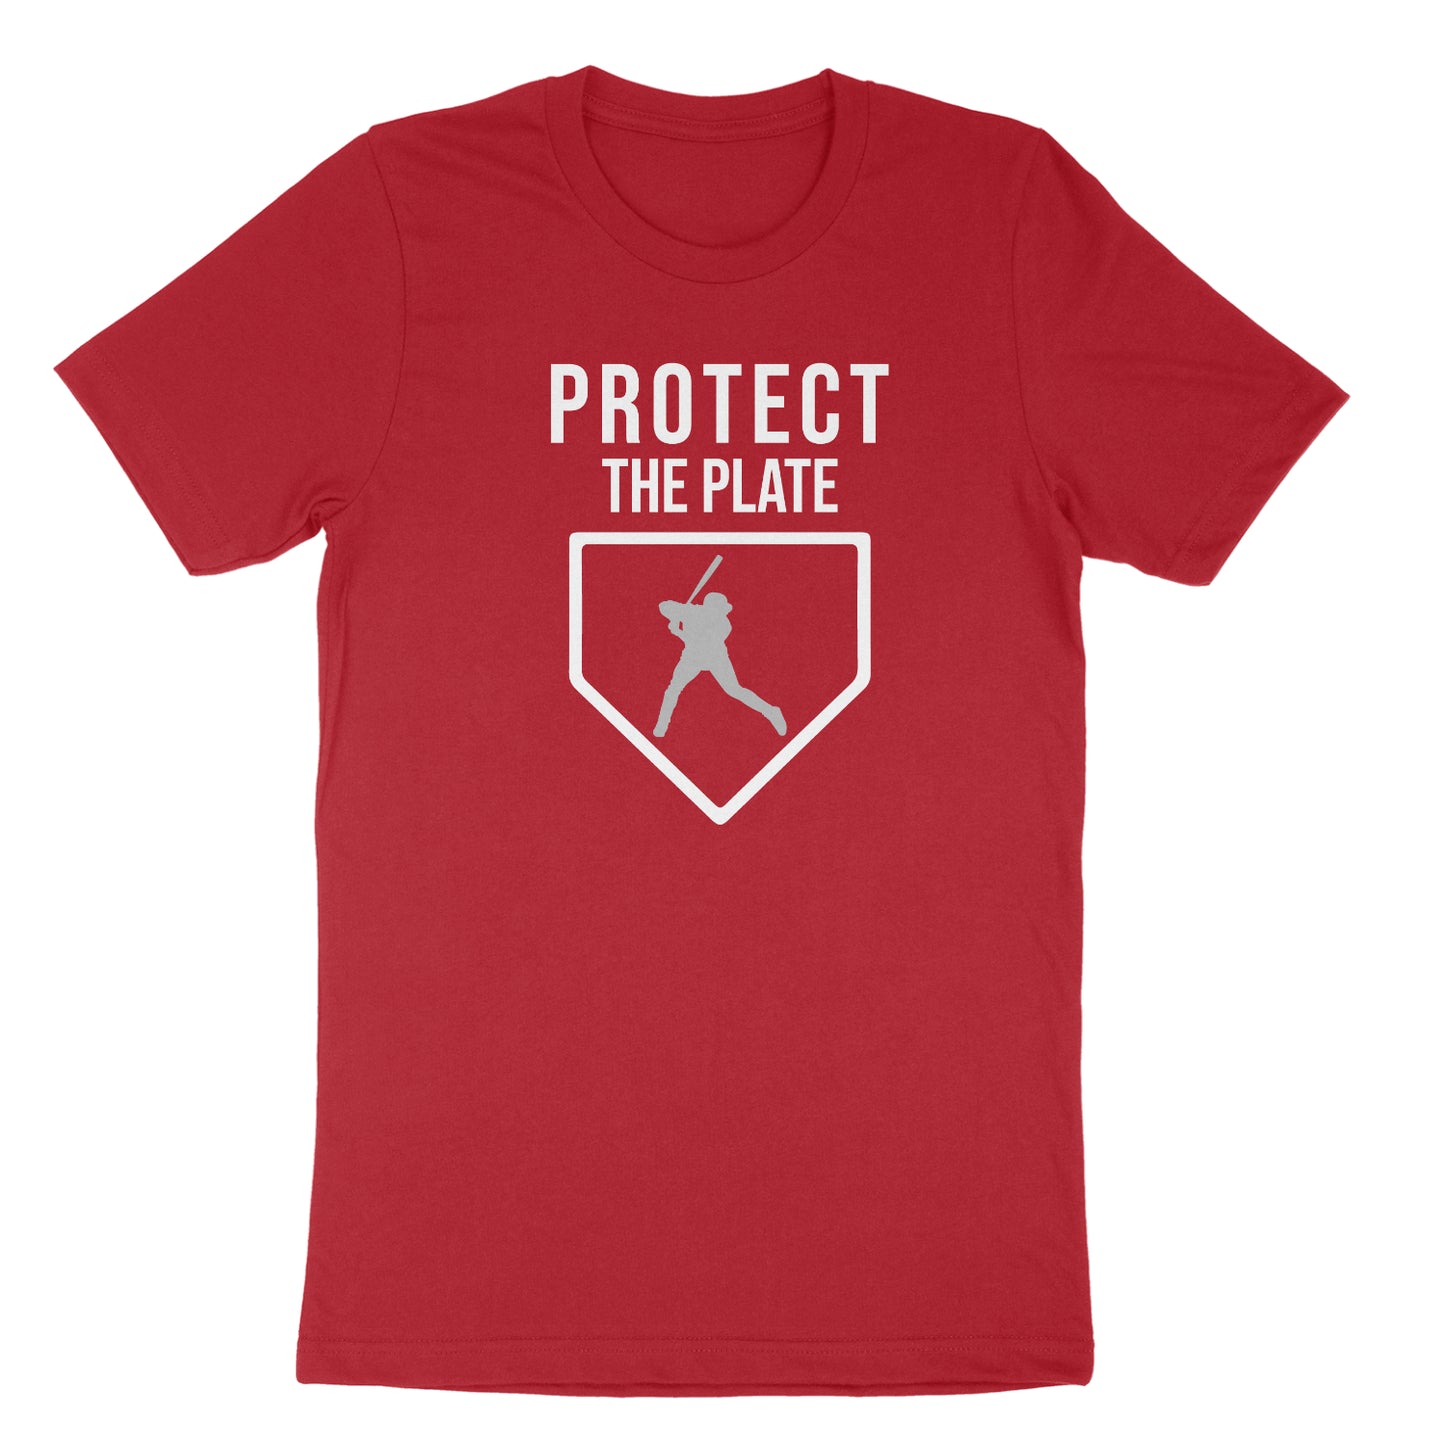 "Protect the Plate" Tee